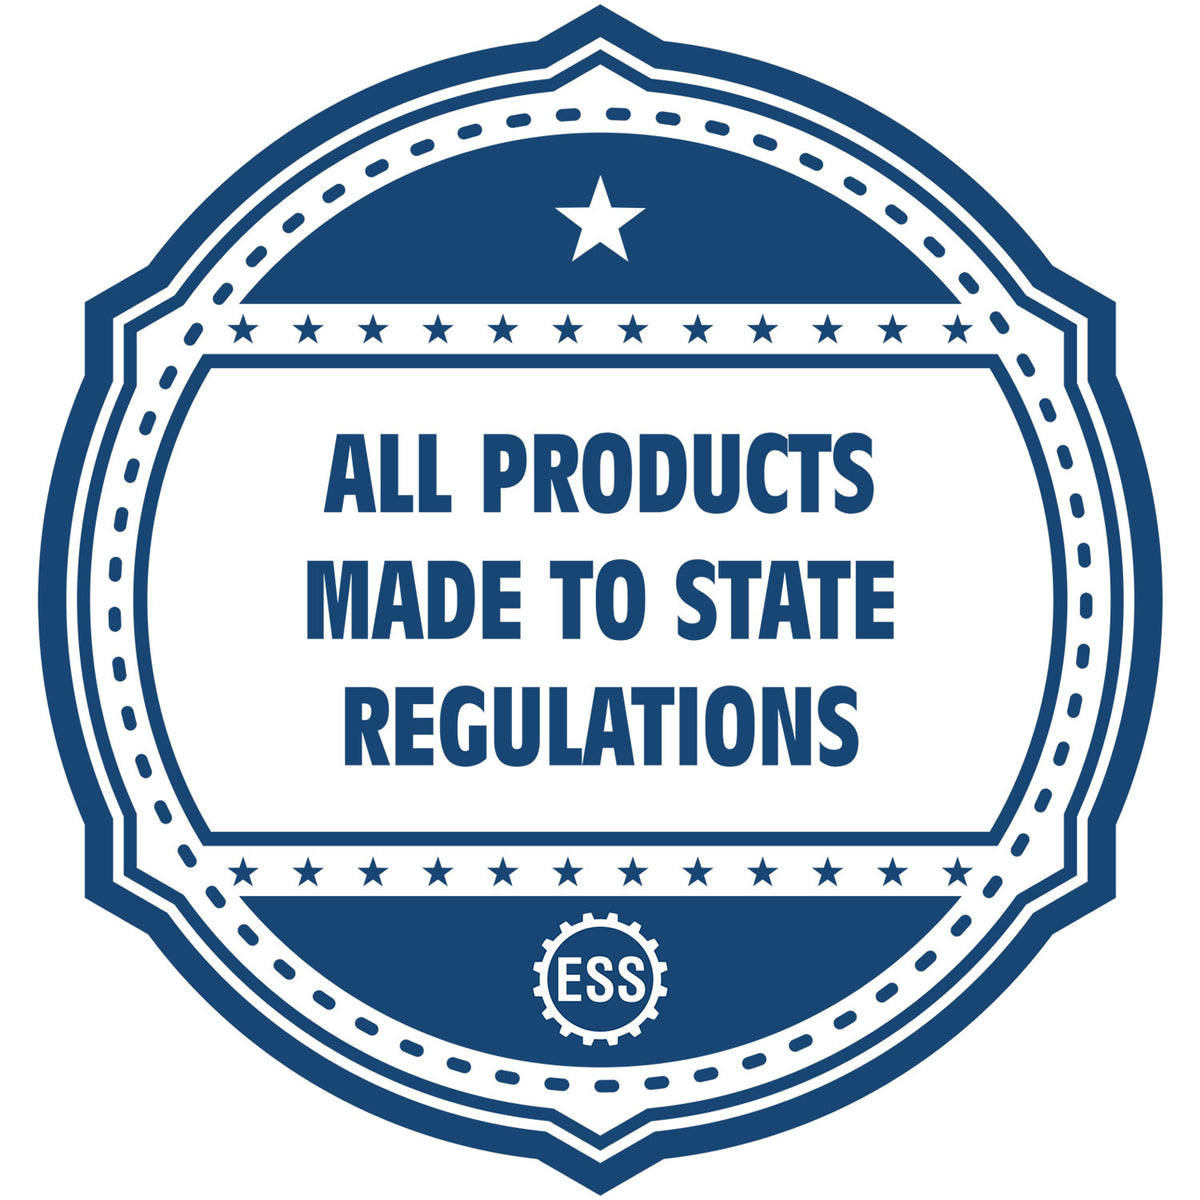 An icon or badge element for the Tennessee Landscape Architectural Seal Stamp showing that this product is made in compliance with state regulations.